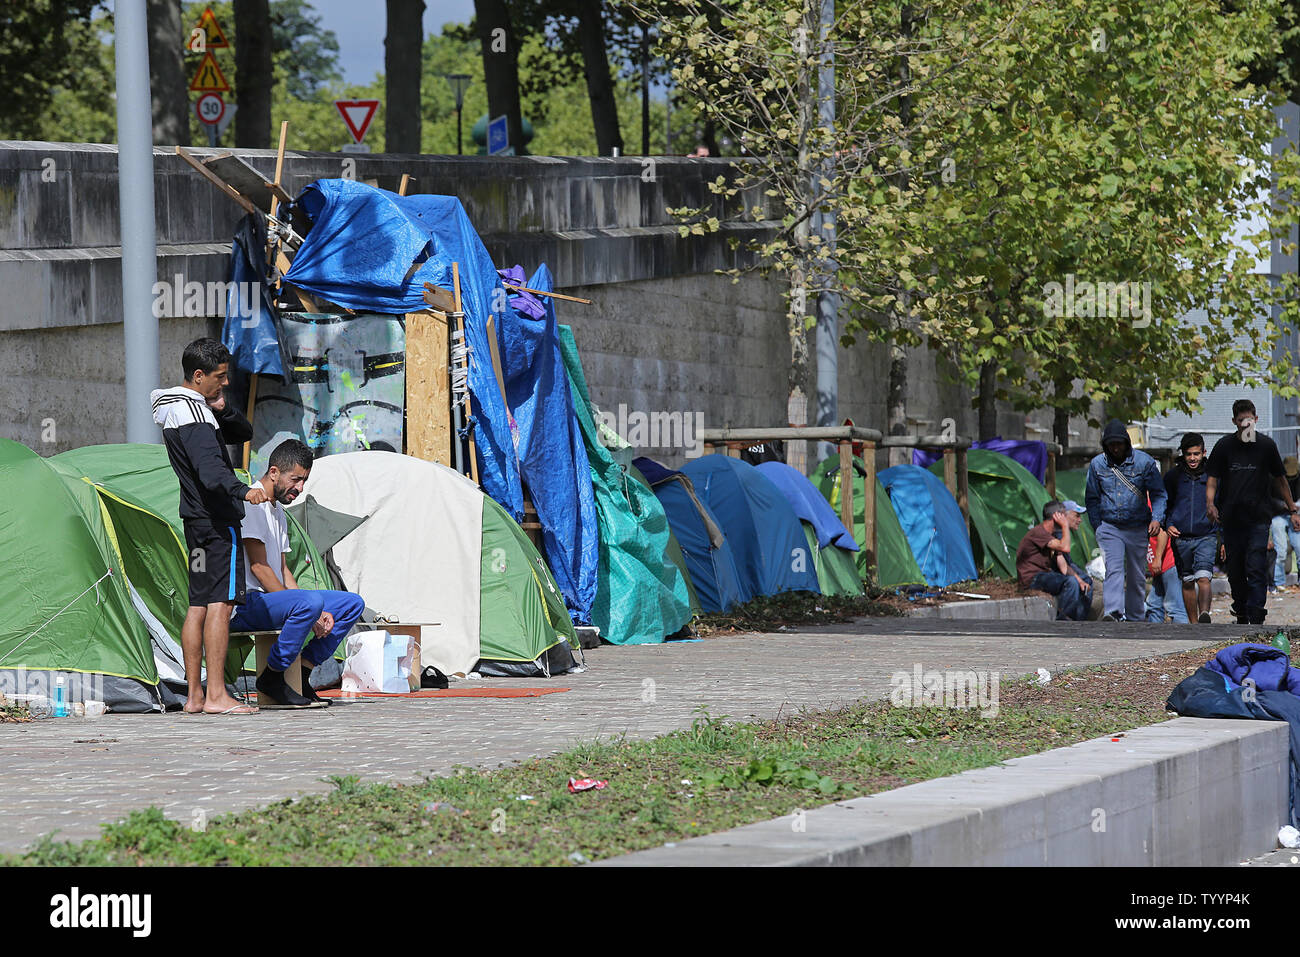 A makeshift migrant camp is seen along the banks of the Seine river near  Gare d'Austerlitz in Paris on September 4, 2015. The camp shelters refugees  from over 40 different countries, mainly